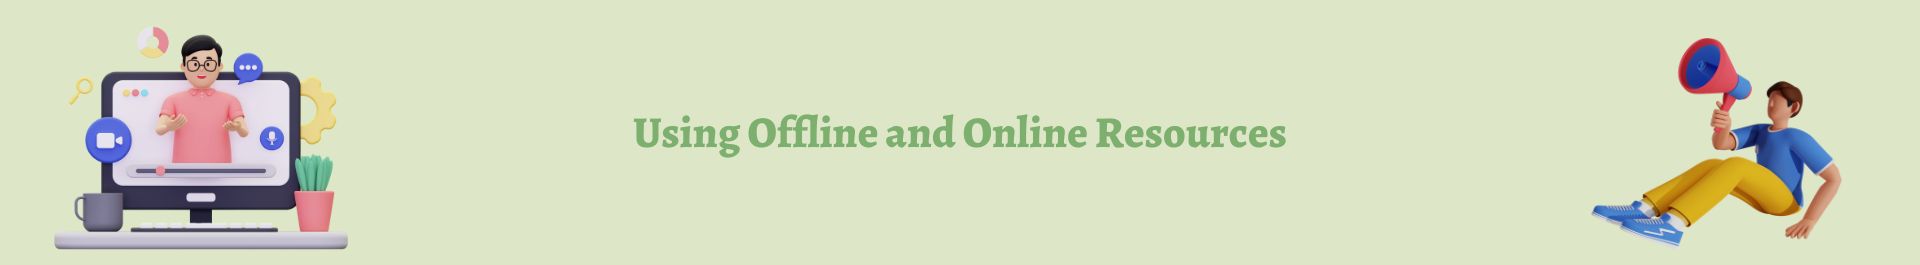 Using Offline and Online Resources - Deal Acres